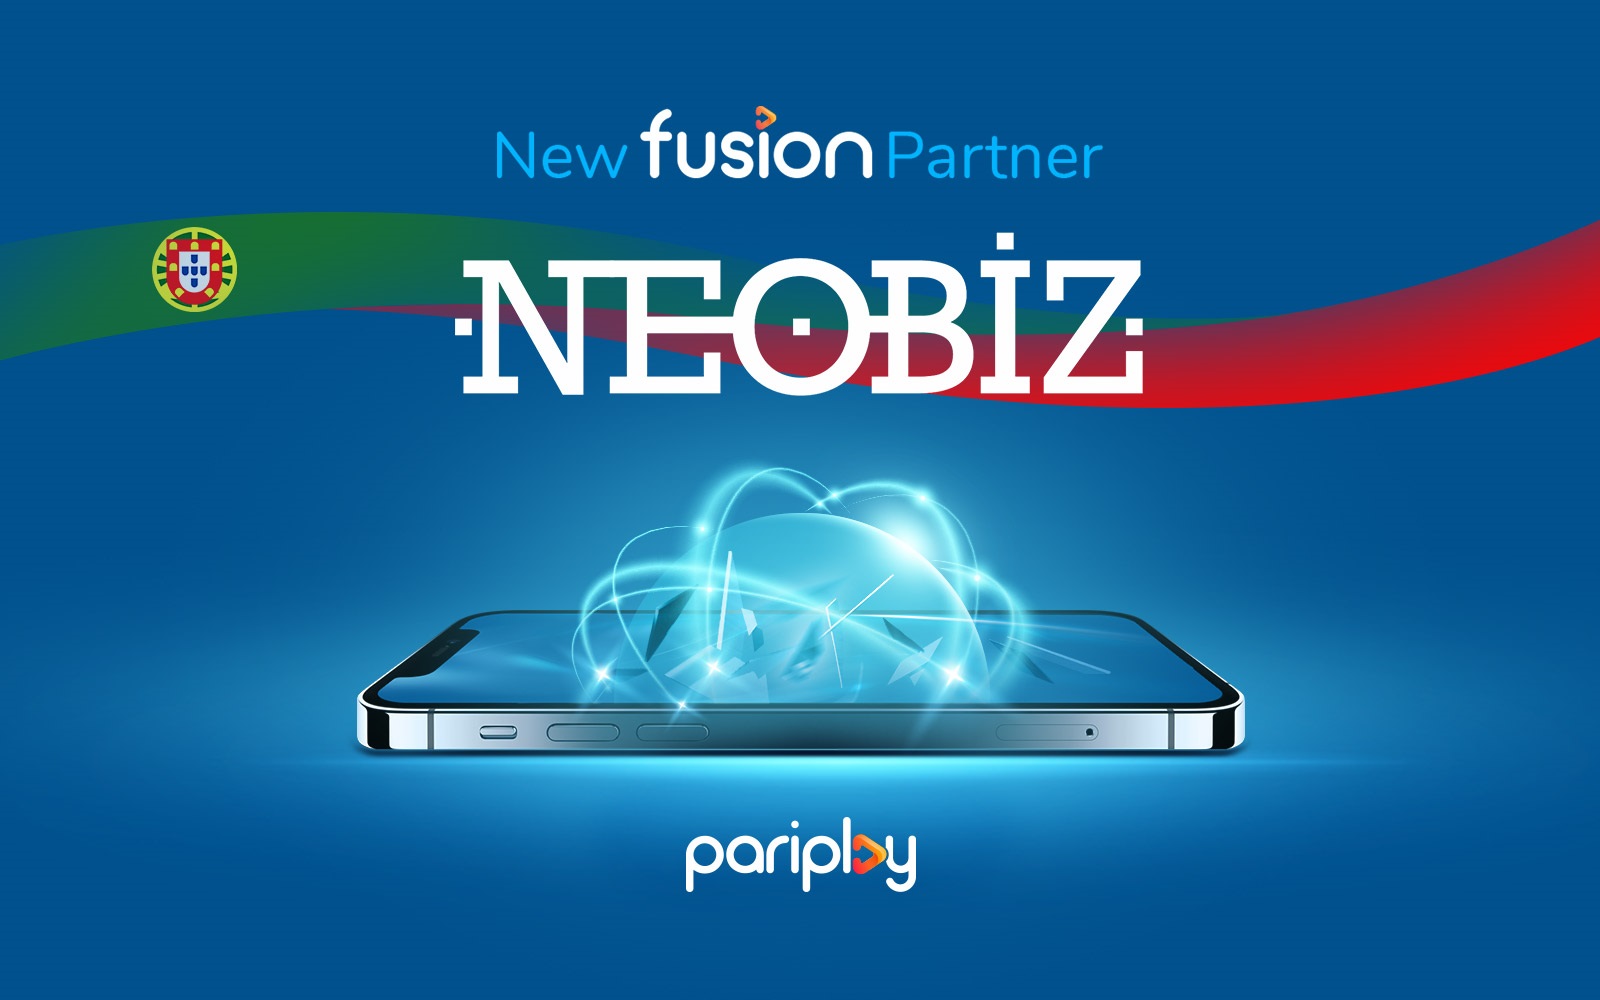 Pariplay boosts Fusion offering with Neobiz content